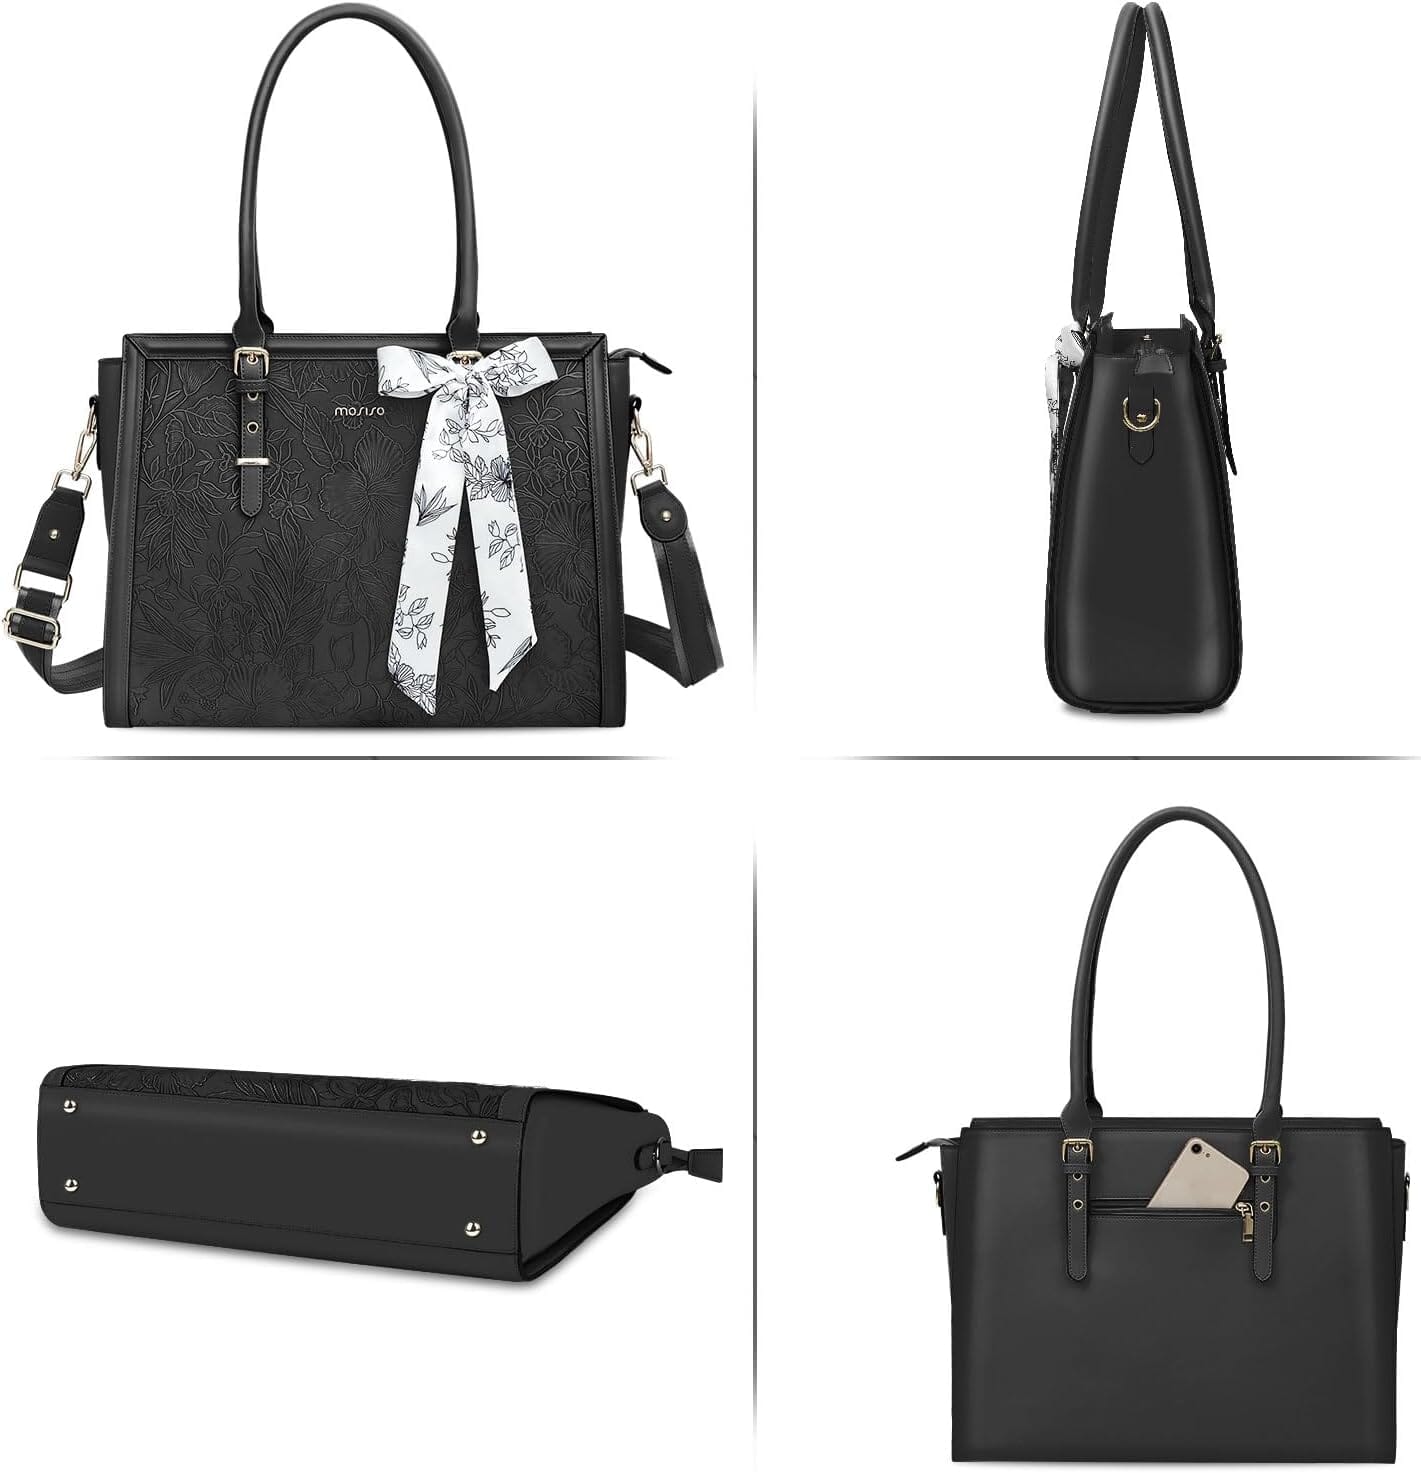 Women's 15 Inch LaptopTote The Store Bags 